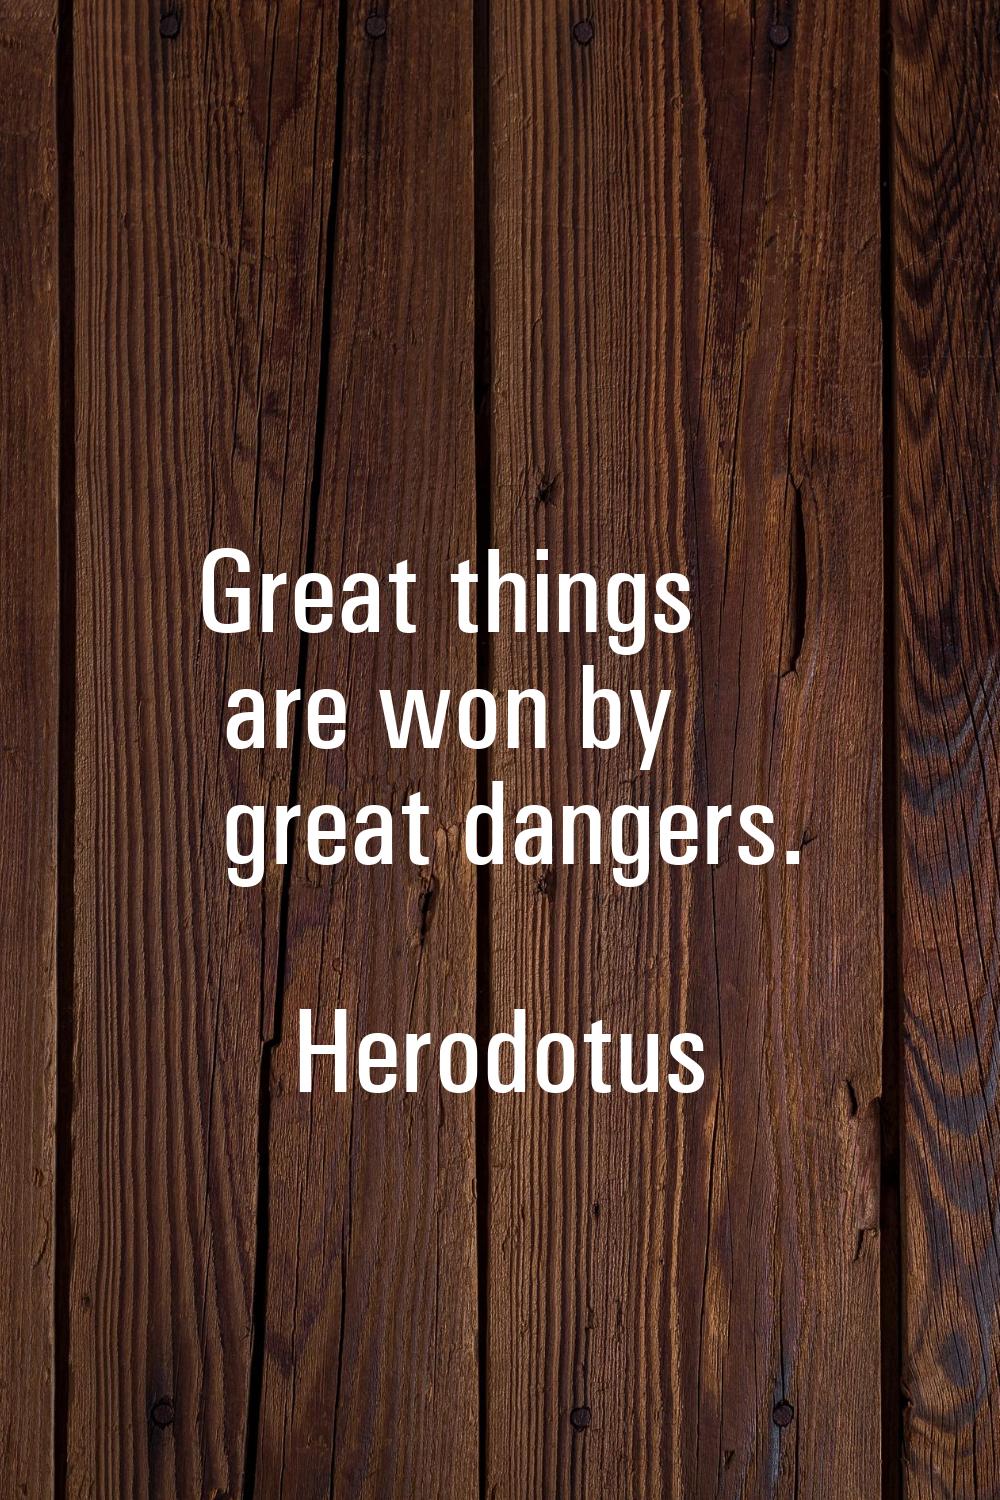 Great things are won by great dangers.